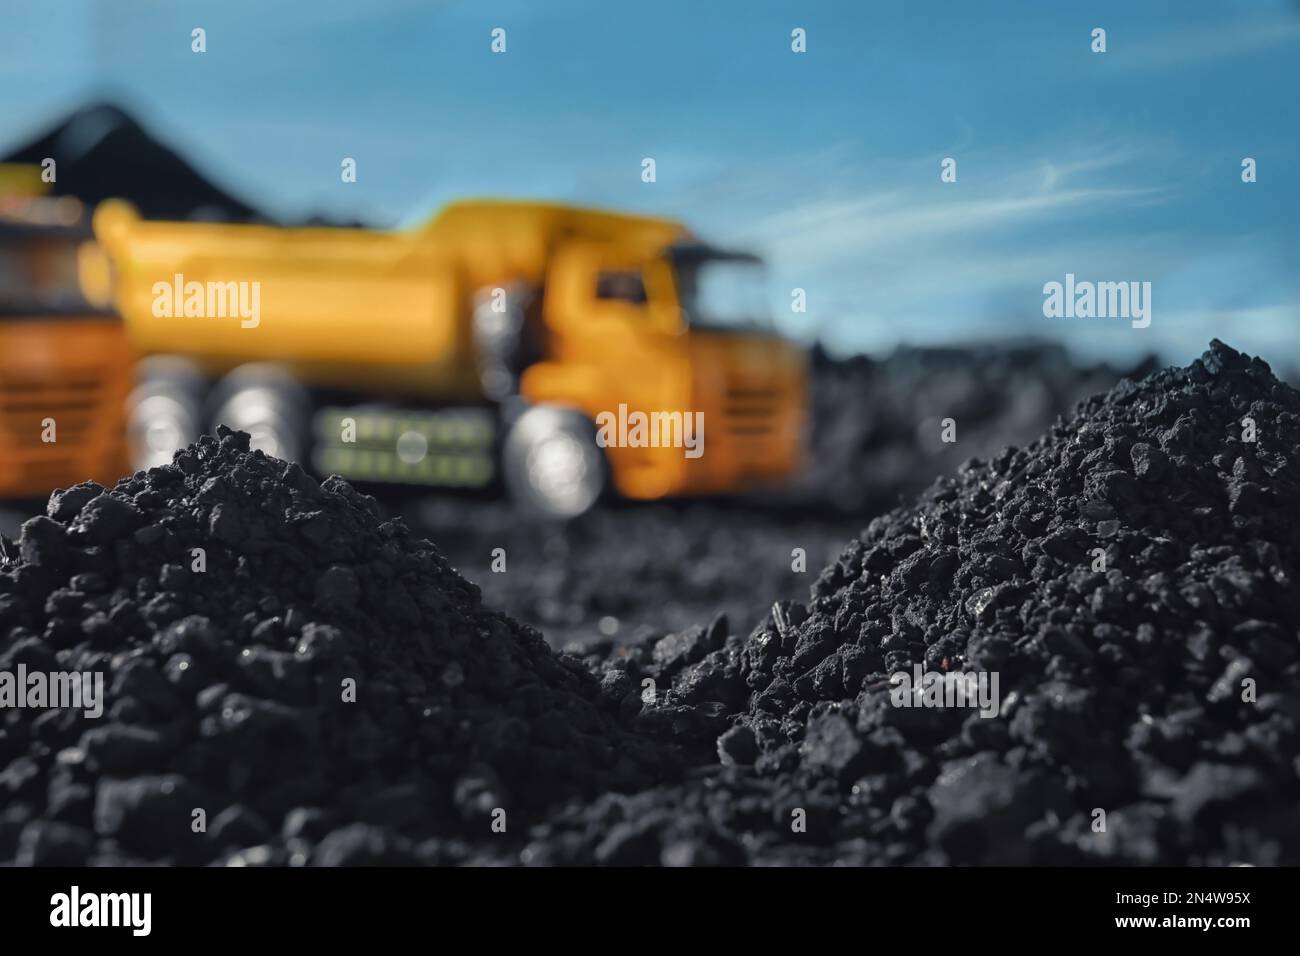 Pile of coal and blurred yellow truck on background, closeup Stock Photo